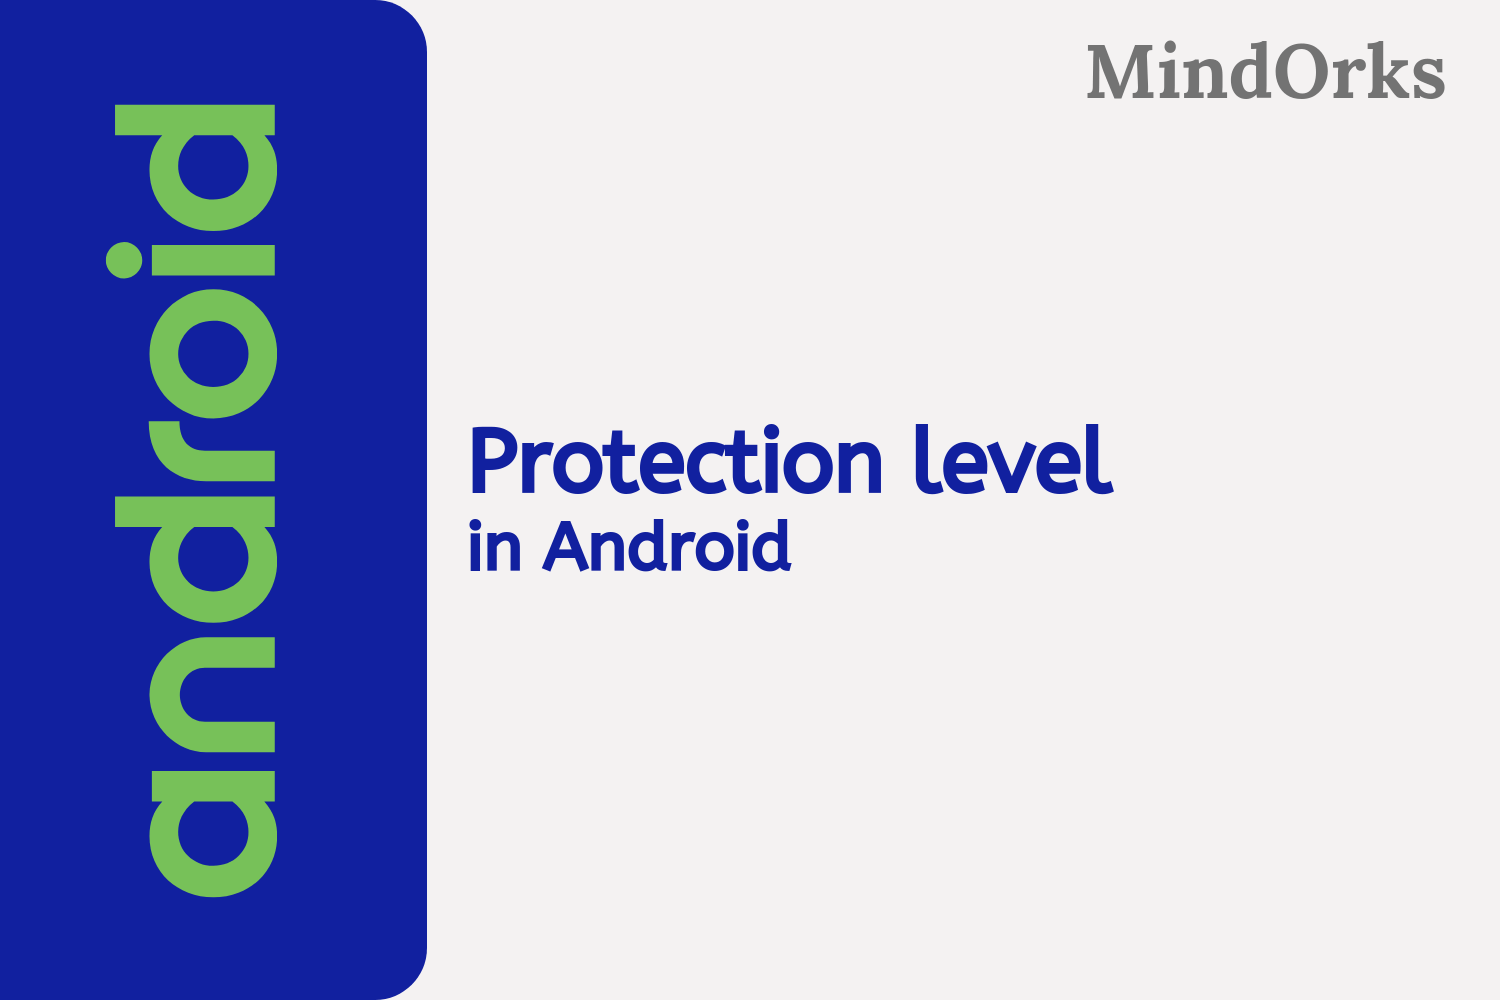 What are the different protection levels in Android Permission?